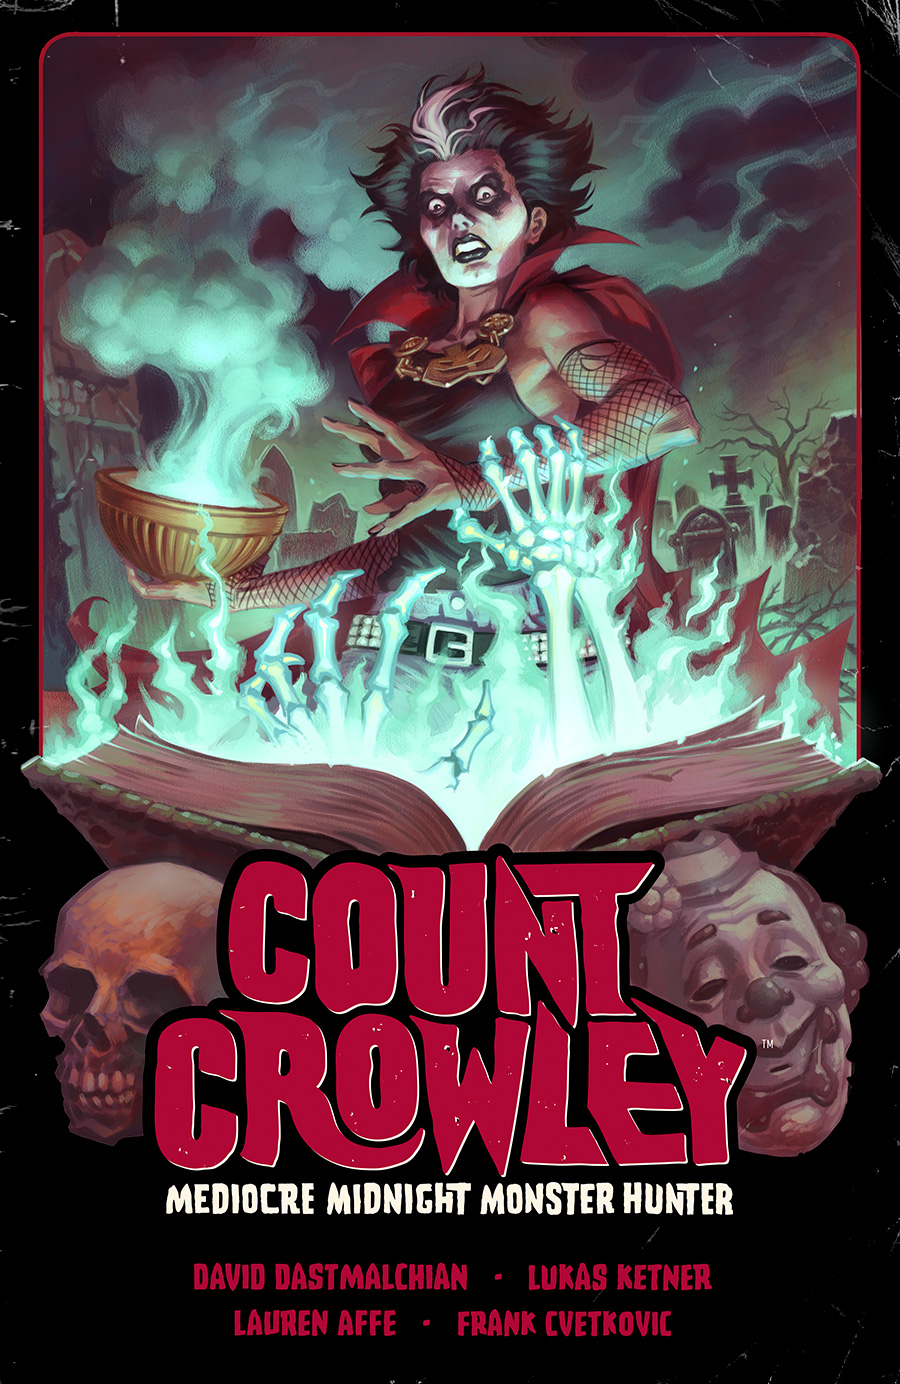 Count Crowley Vol 3 Mediocre Midnight Monster Hunter TP